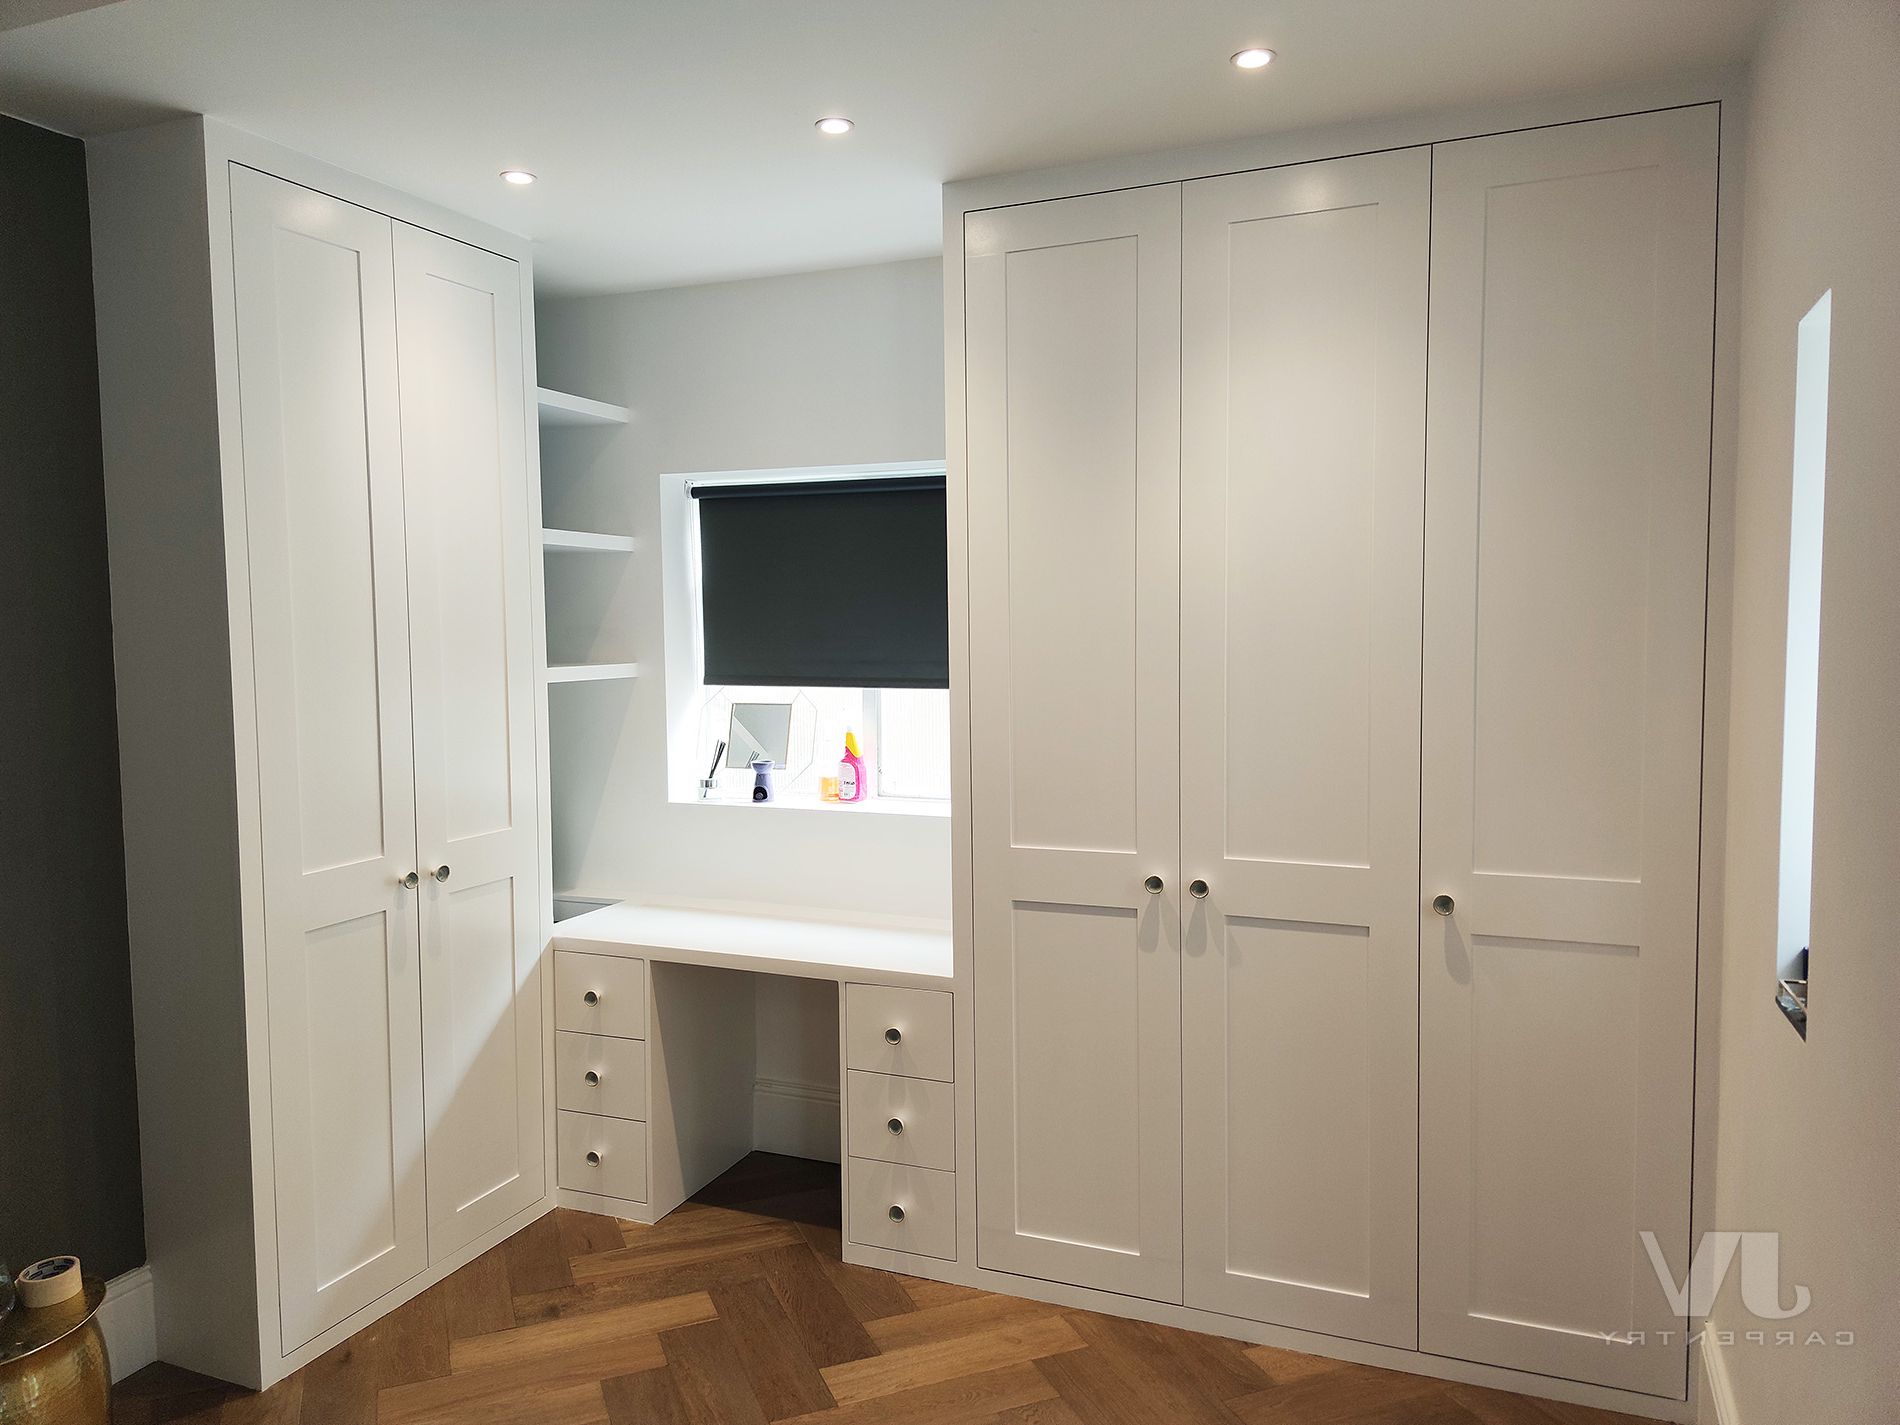 9 Fitted Wardrobes With Dressing Table Ideas | Jv Carpentry Intended For Wardrobes And Dressing Tables (Gallery 1 of 20)